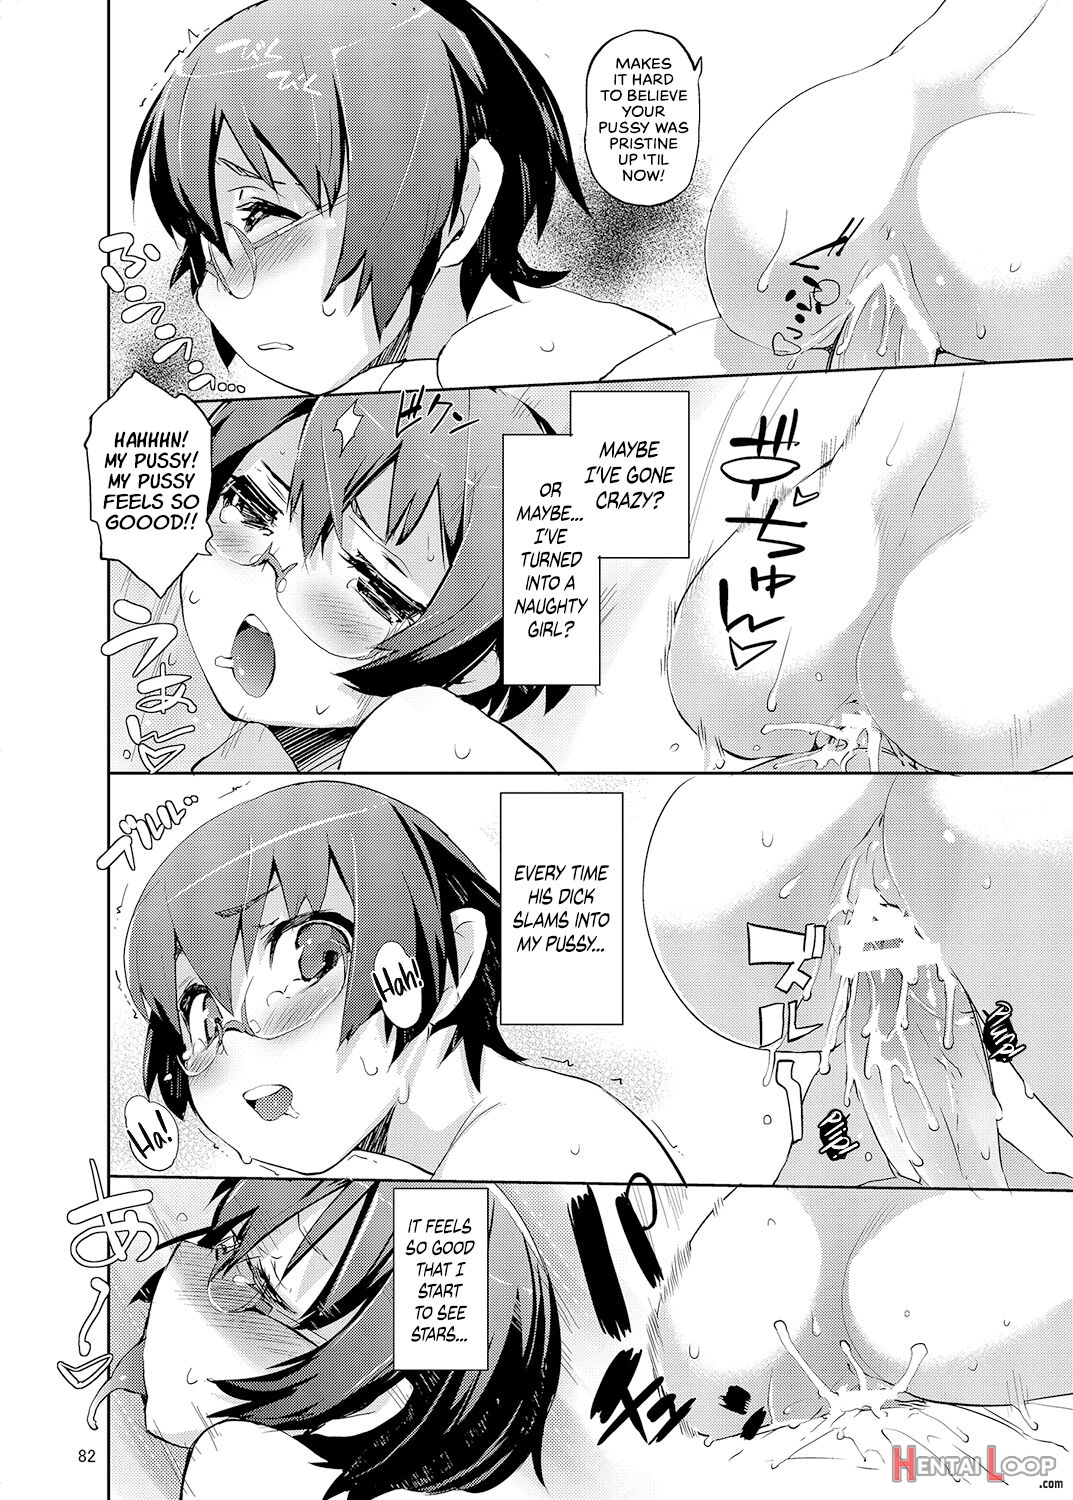 M- My Little Sister... She's... Revised Series Compilation page 83